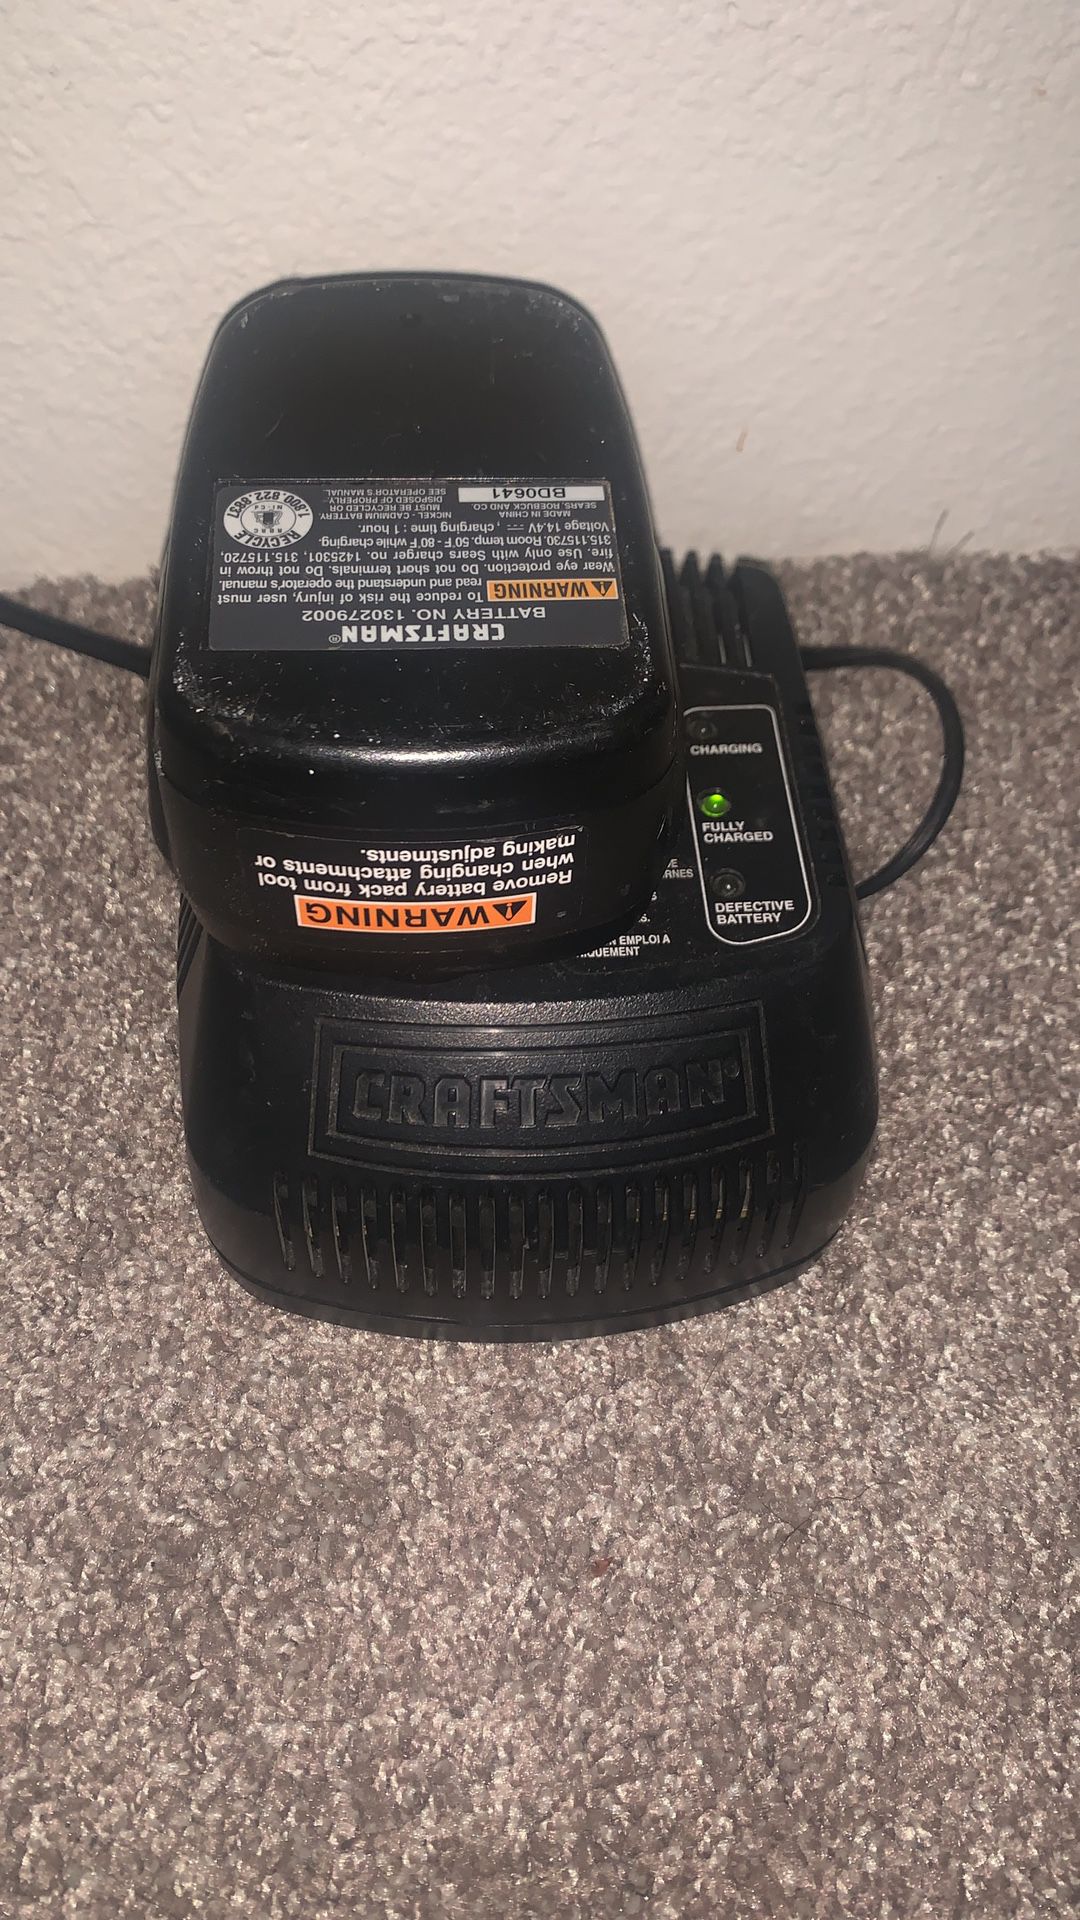 Craftsman 1 Hour Battery Charger 